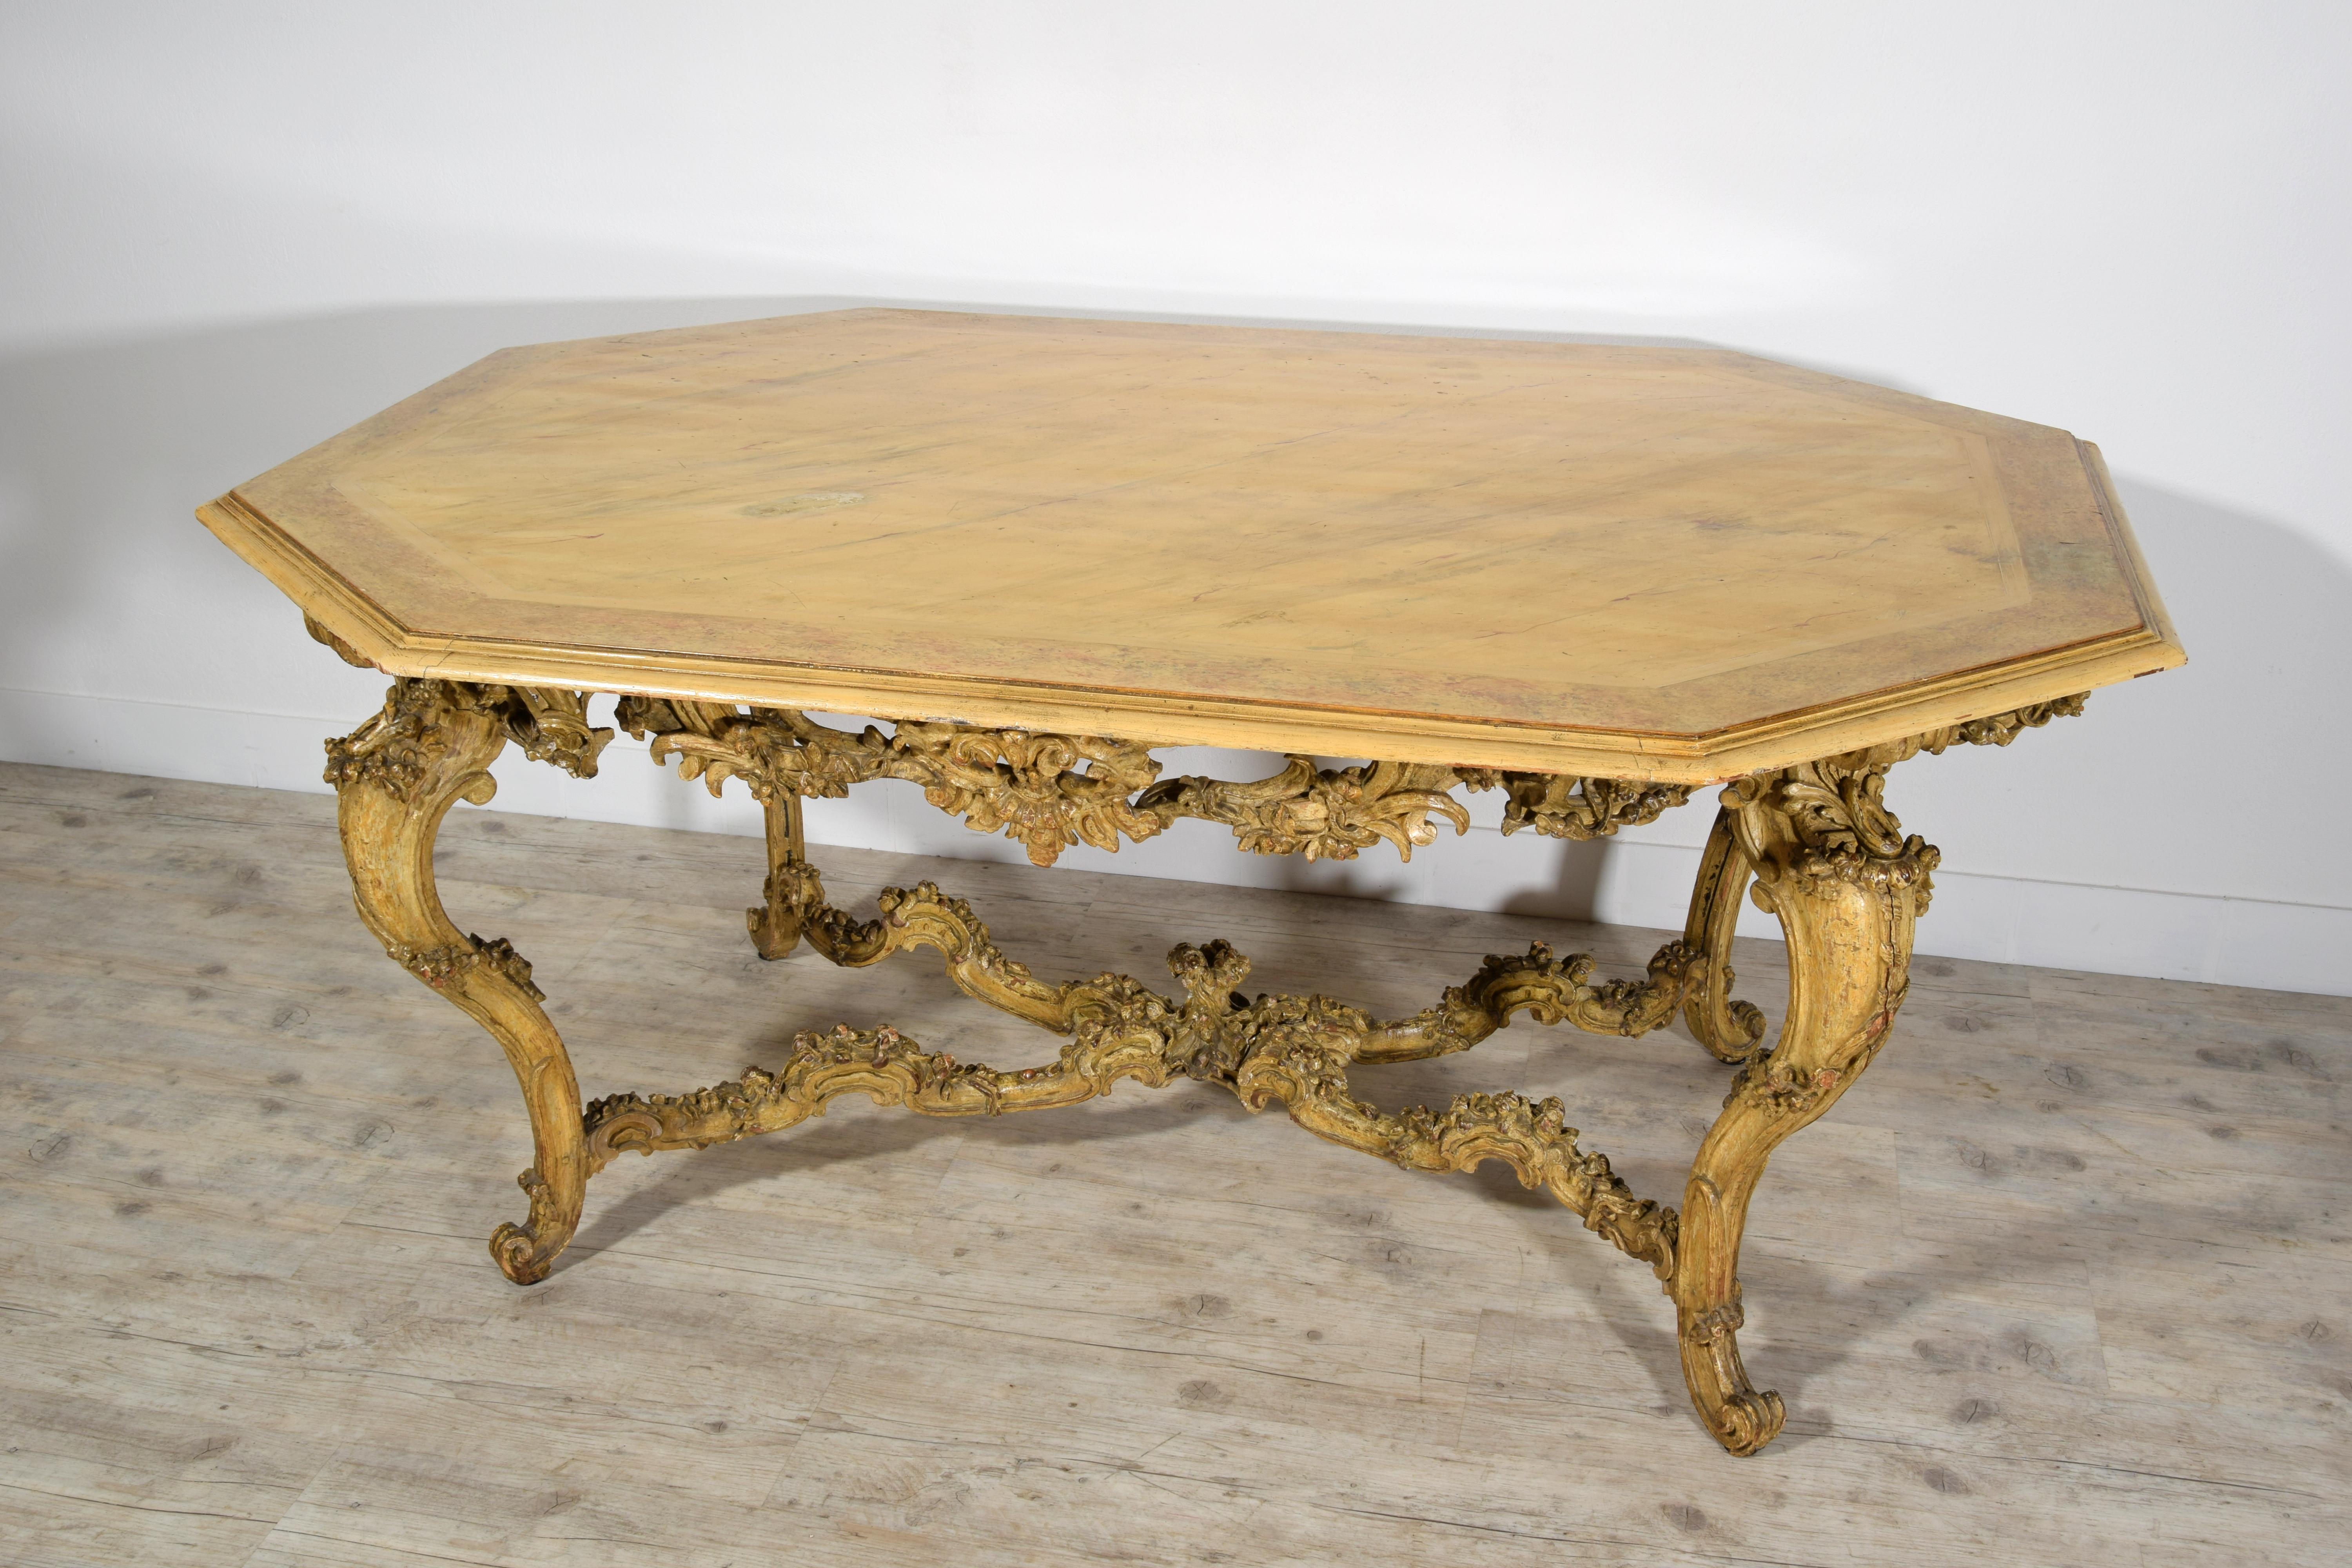 Italian Baroque Carved Gilt and Lacquered Wood Center Table, 18th Century 4